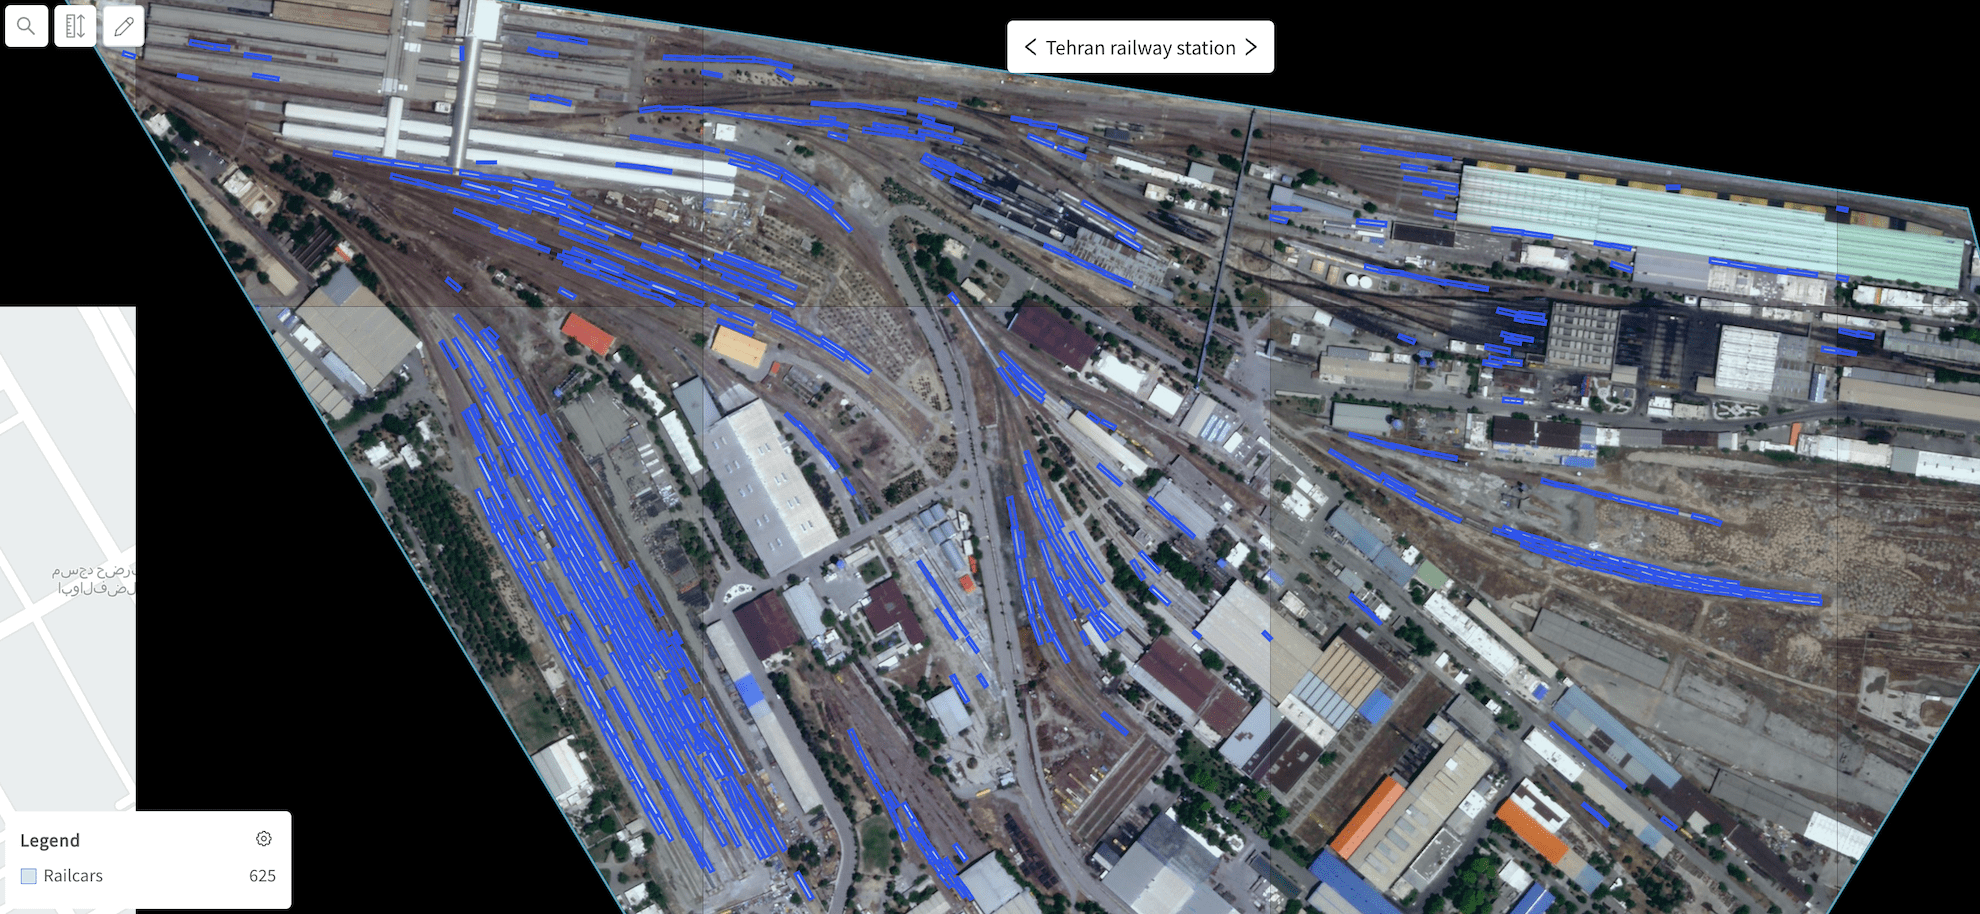 Railcar detections at the Tehran railway station